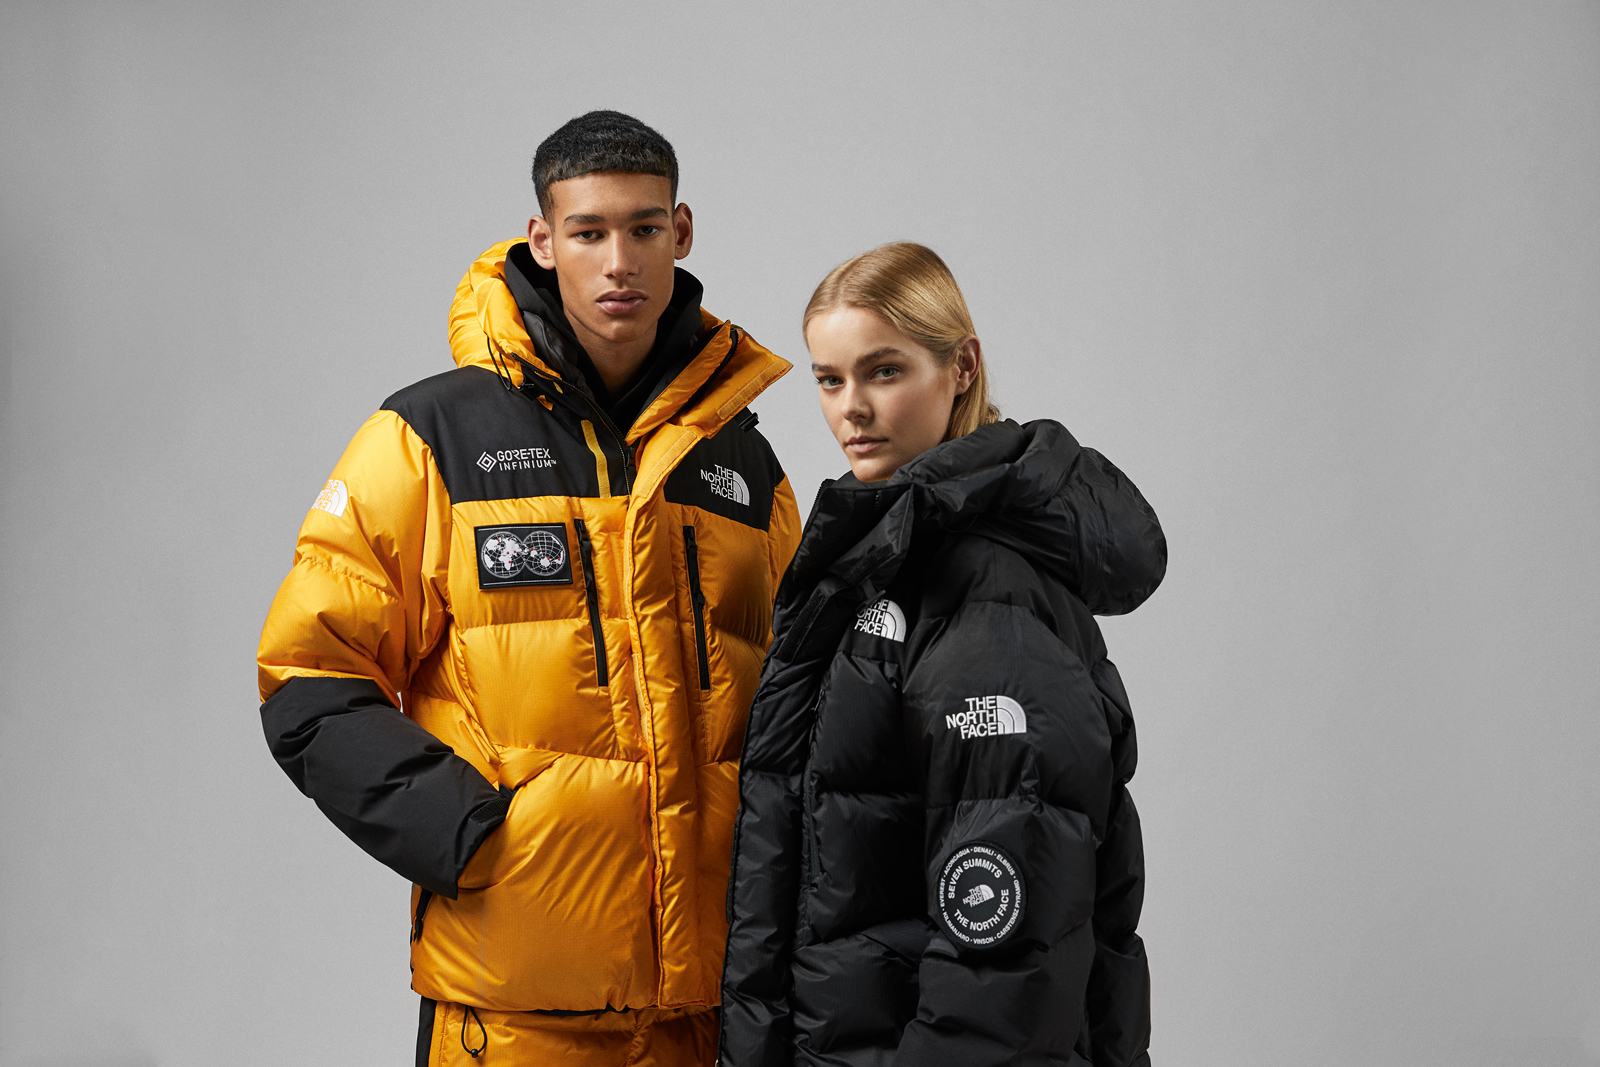 north face expedition down jacket